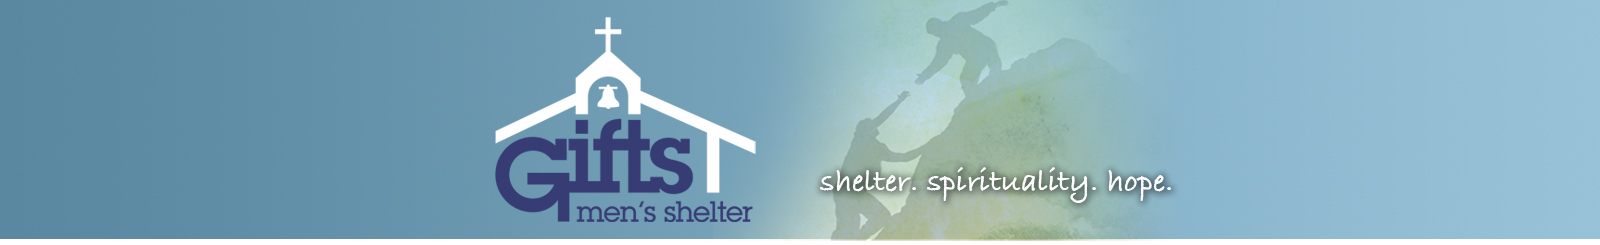 Gifts Mens Shelter